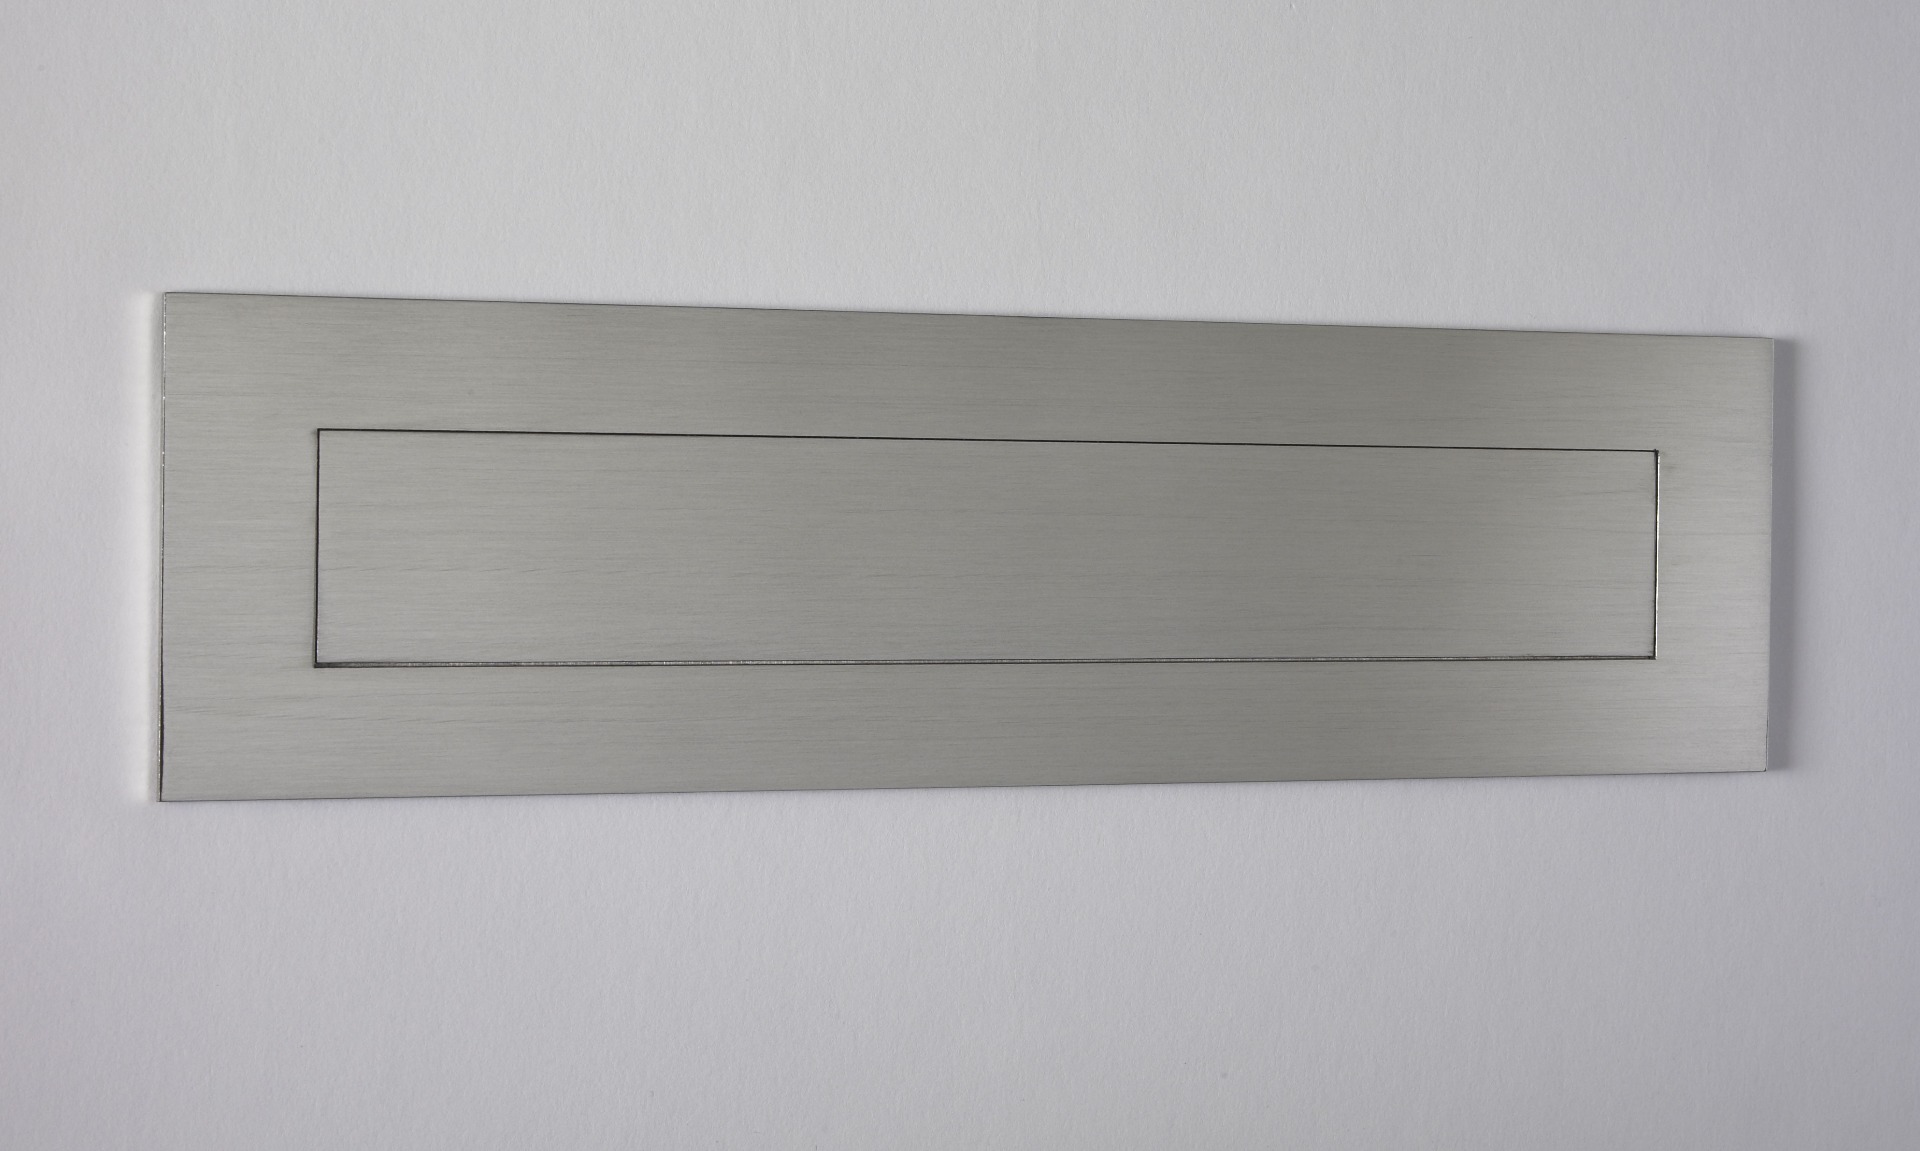 Stainless Steel Mail Slot - SMALL (11.8 in. x 3 in.) - Front Piece Only (Choose Finish)